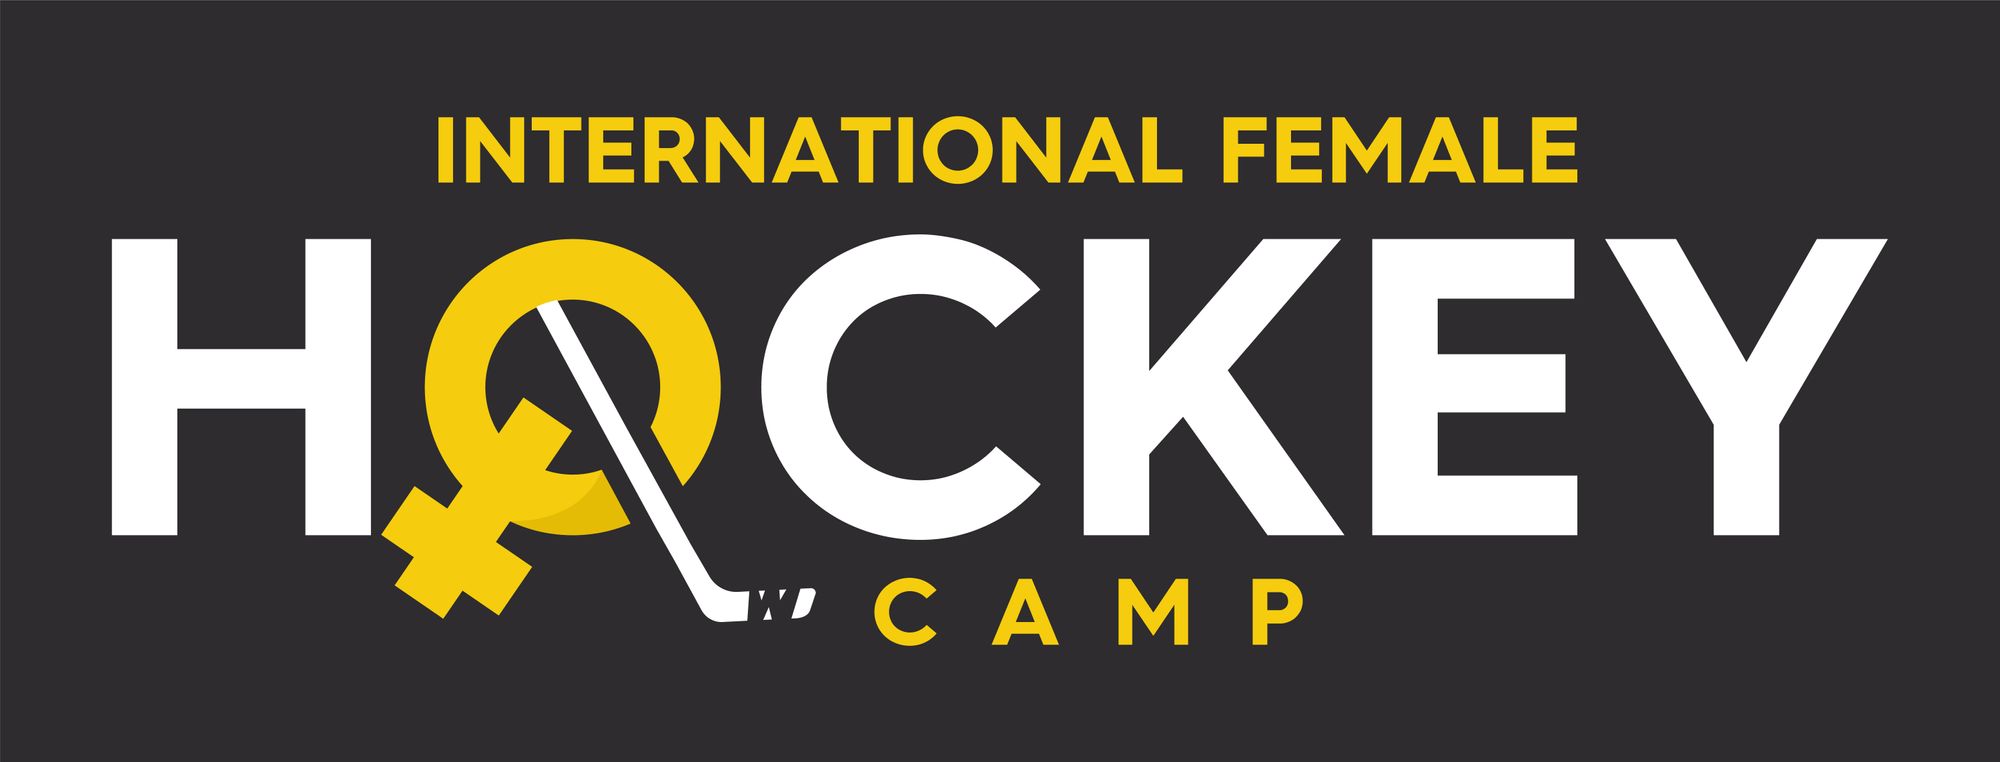 The words INTERNATIONAL FEMALE HOCKEY CAMP in stylized white and yellow lettering on a dark grey background.